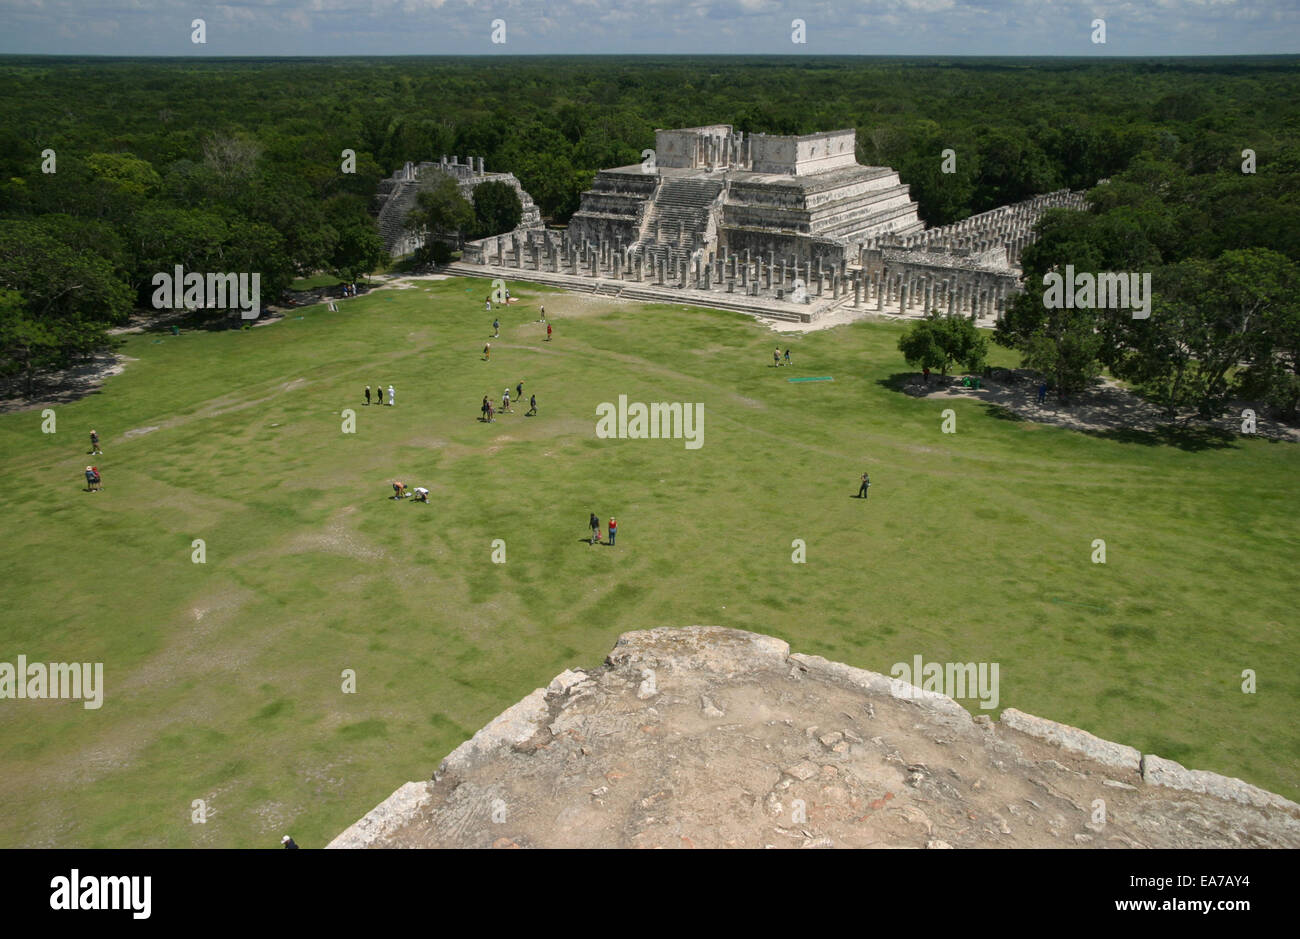 Aerial view of the Temple of the Warriors in the Chichen Itza ruins in the Mayan Riviera, Yucatan Peninsula, Mexico Stock Photo